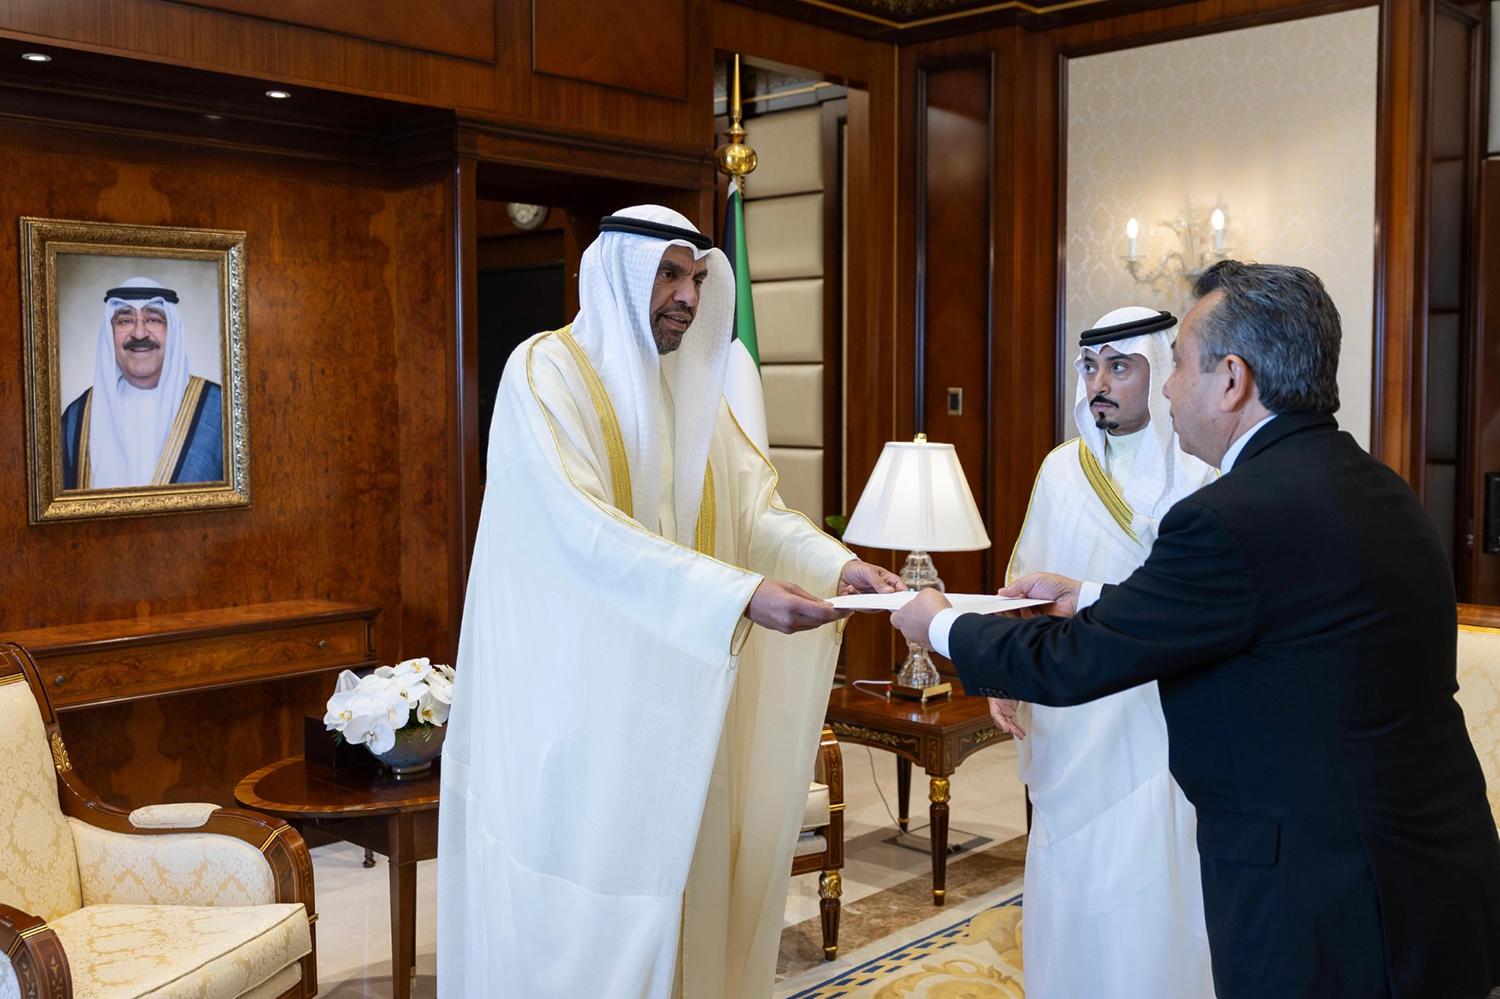 Minister of Foreign Affairs Abdullah Al-Yahya receives credentials of new Ambassador of Mexico to Kuwait Edward Haller